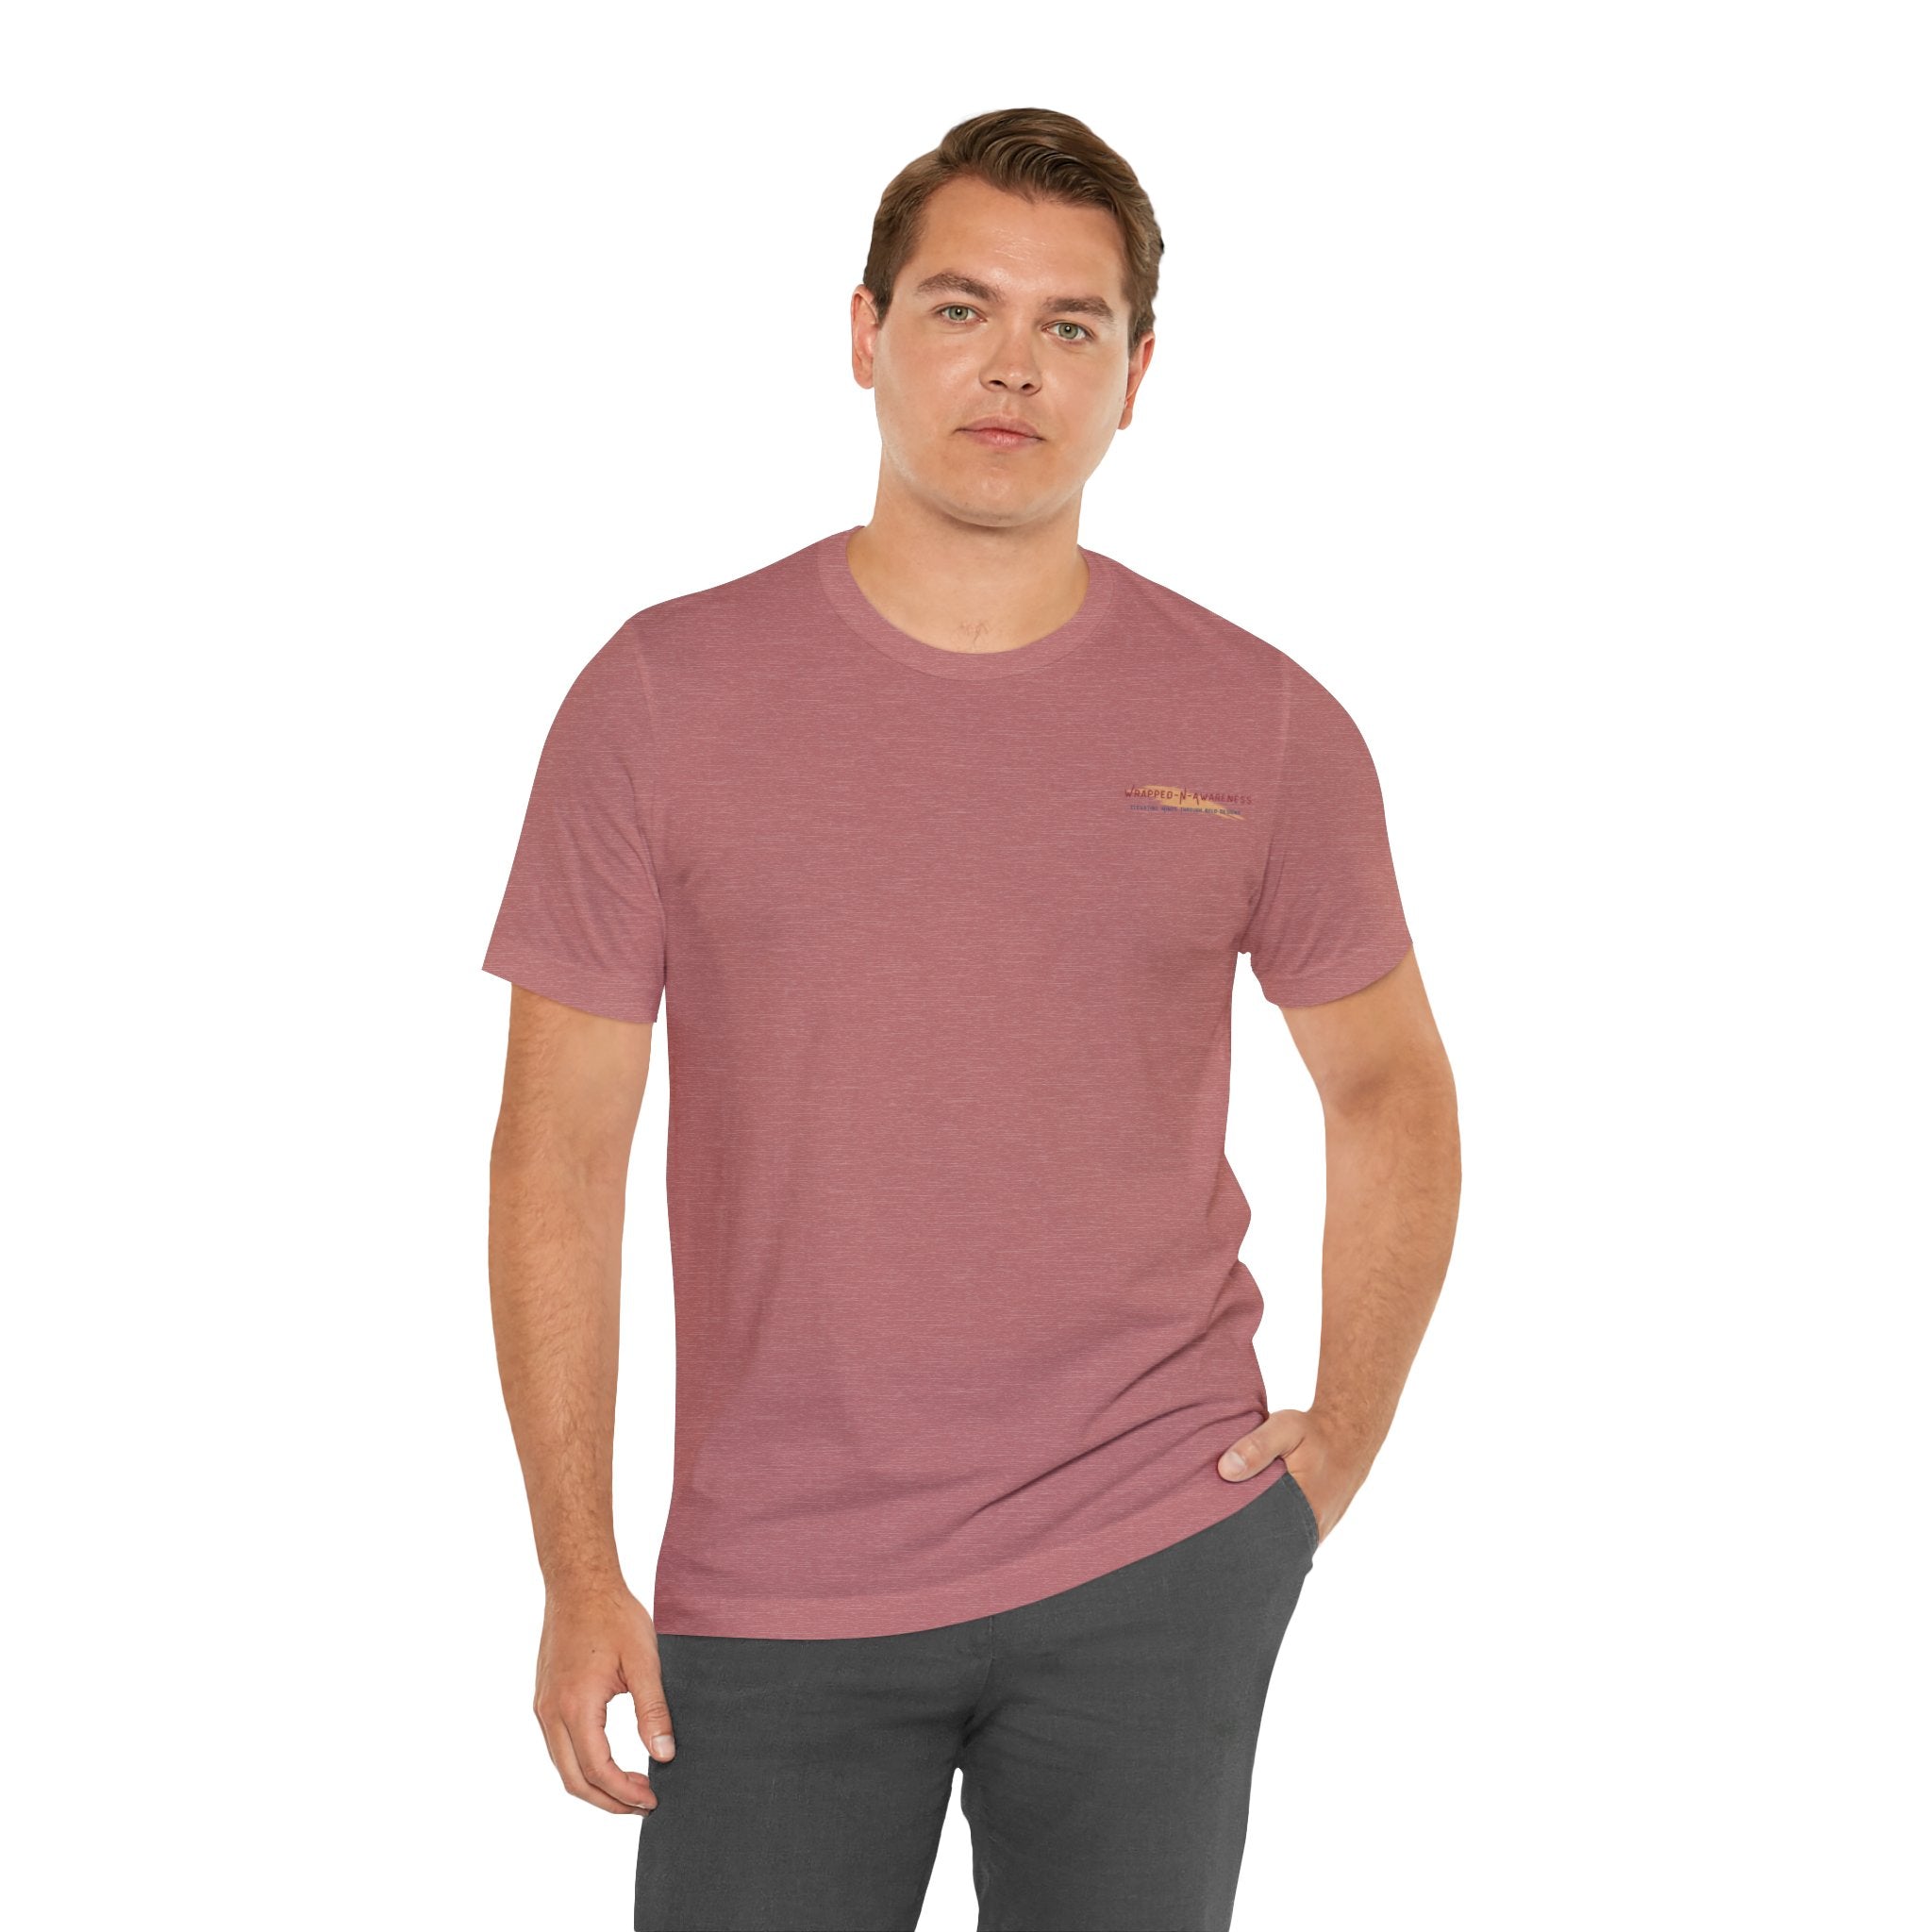 You Are Enough Short Sleeve Tee Bella+Canvas 3001 Heather Mauve Airlume Cotton Bella+Canvas 3001 Crew Neckline Jersey Short Sleeve Lightweight Fabric Mental Health Support Retail Fit Tear-away Label Tee Unisex Tee T-Shirt 18306328116274710932_2048 Printify